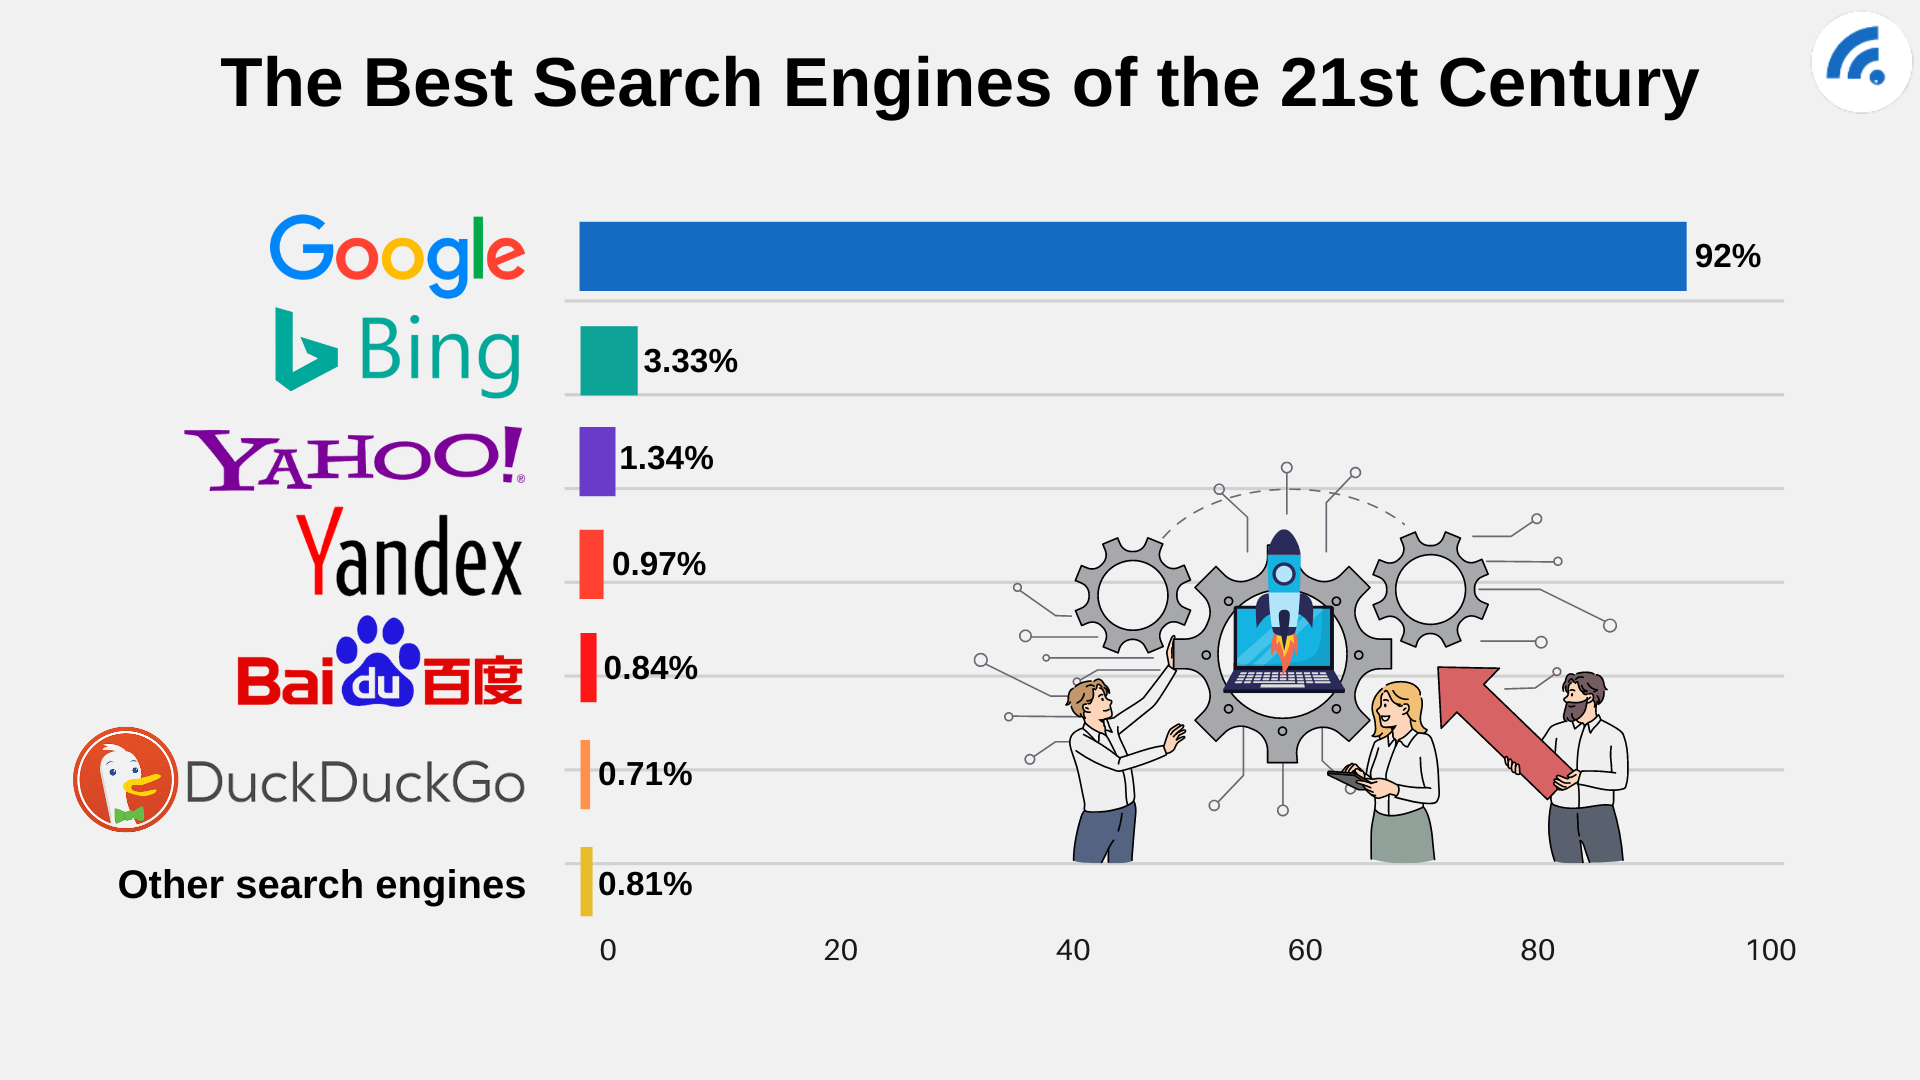 Why is Google most popular search engine?